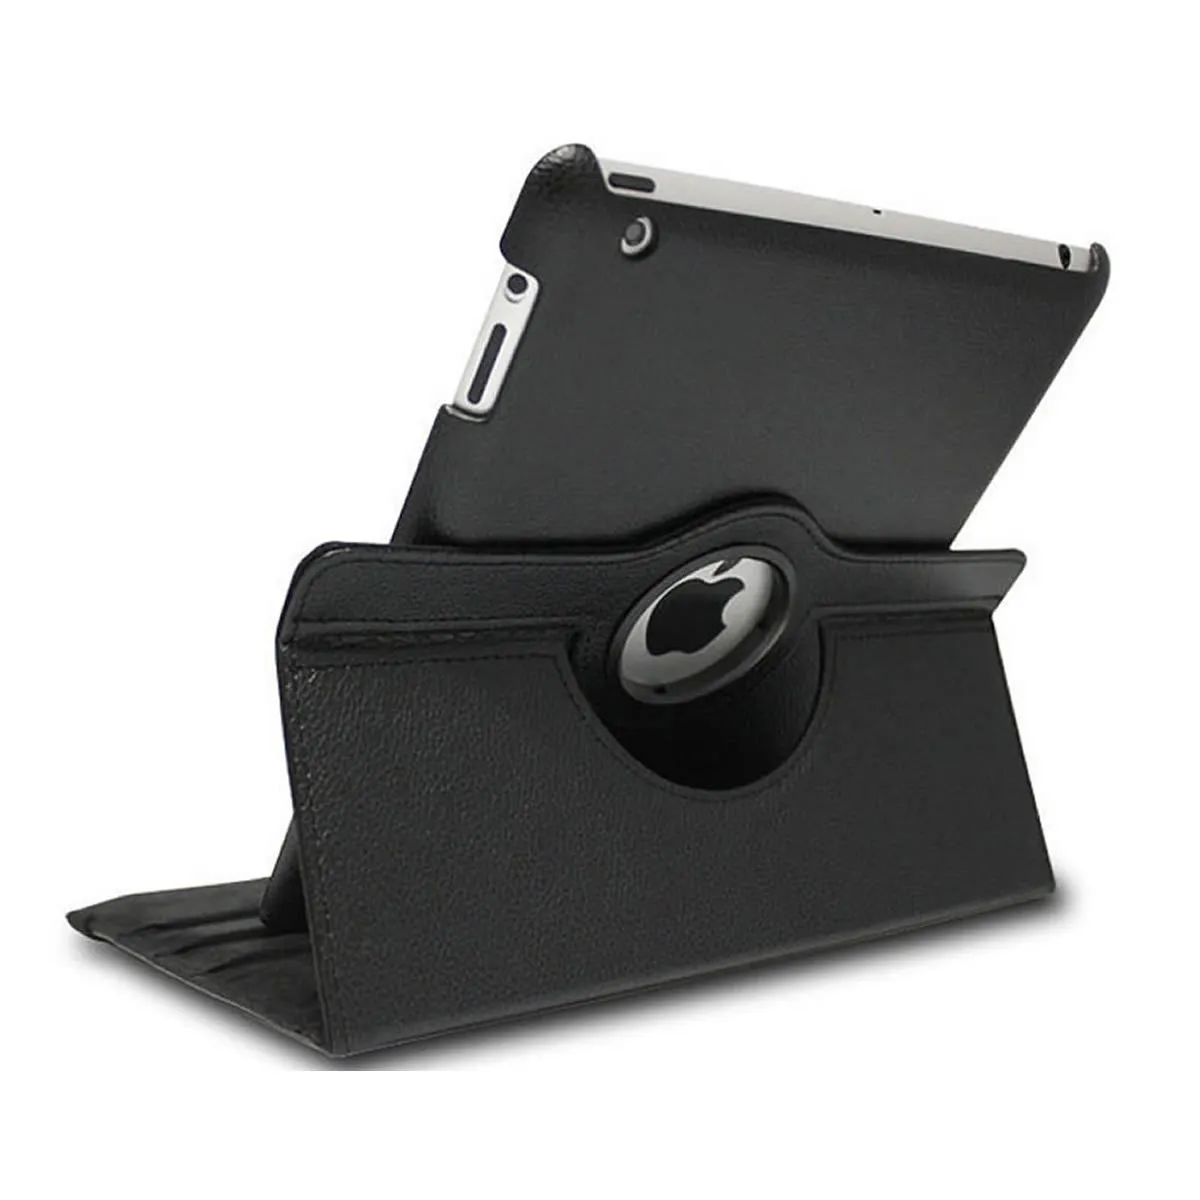 360 Degree Rotating Rotary PU Leather Case Smart Cover Case Stand for iPad Pro iPad mini 4 free DHL